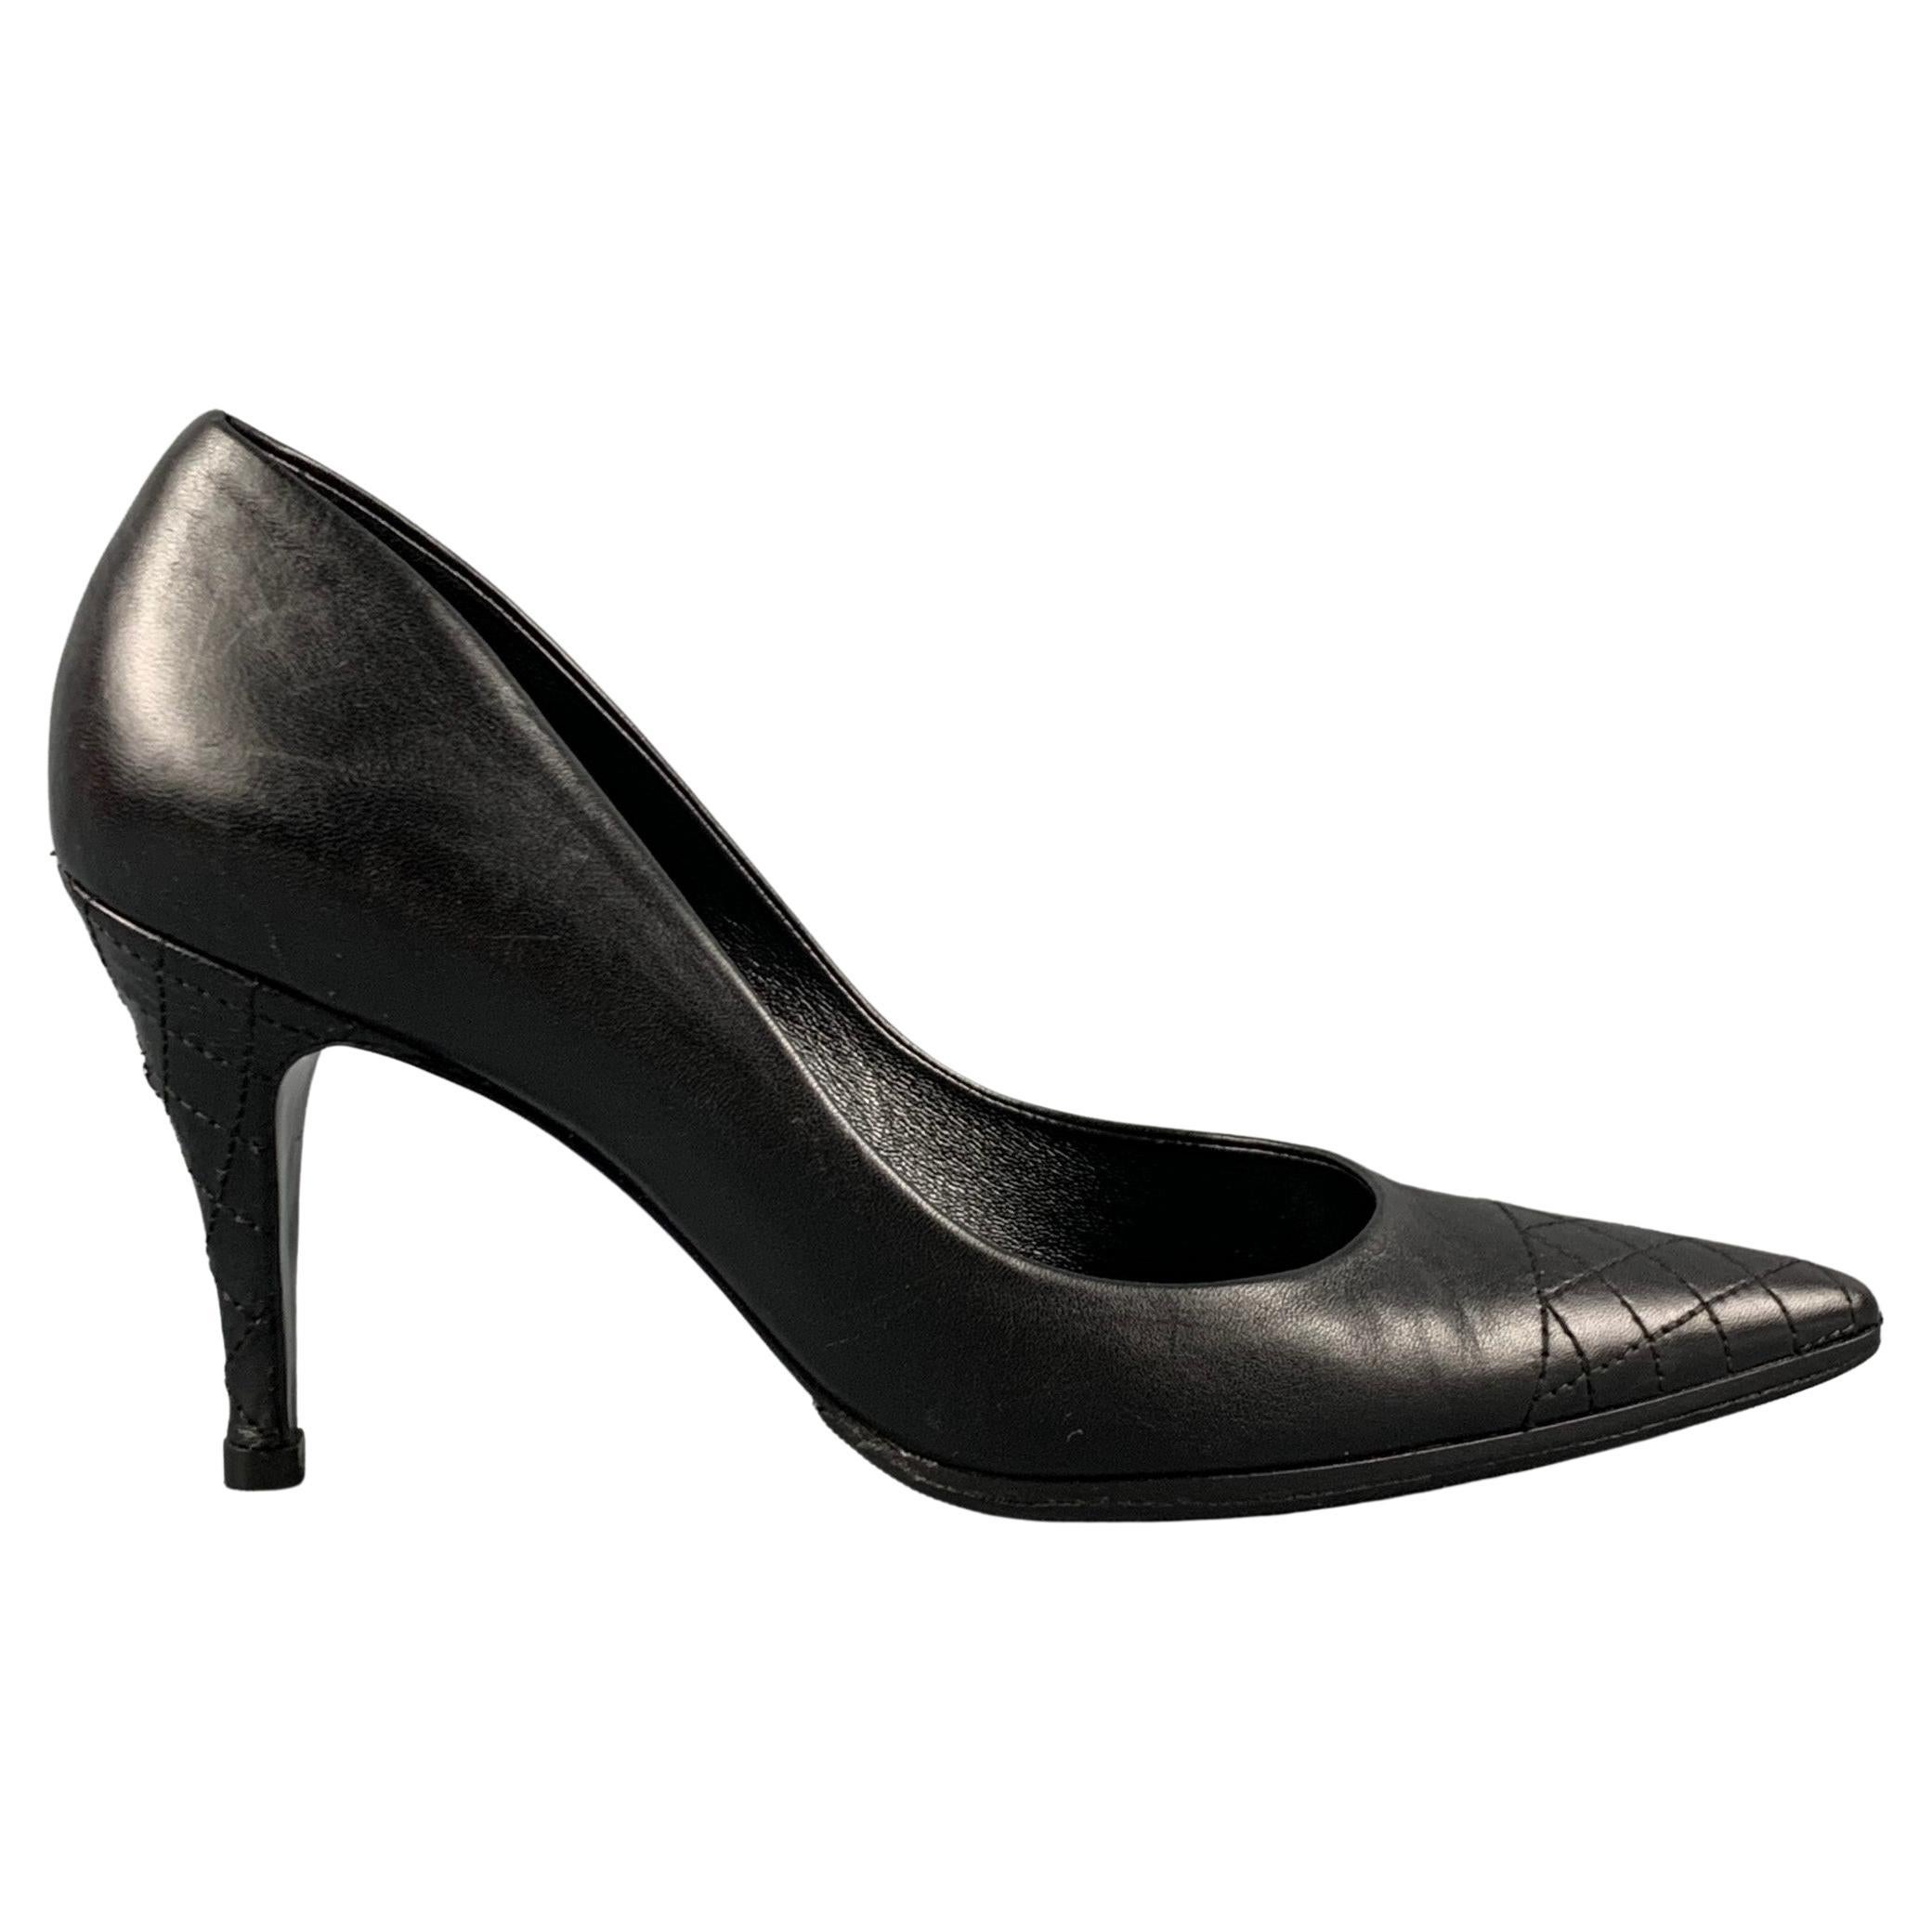 CHANEL Size 7 Black Leather Pointed Toe Pumps